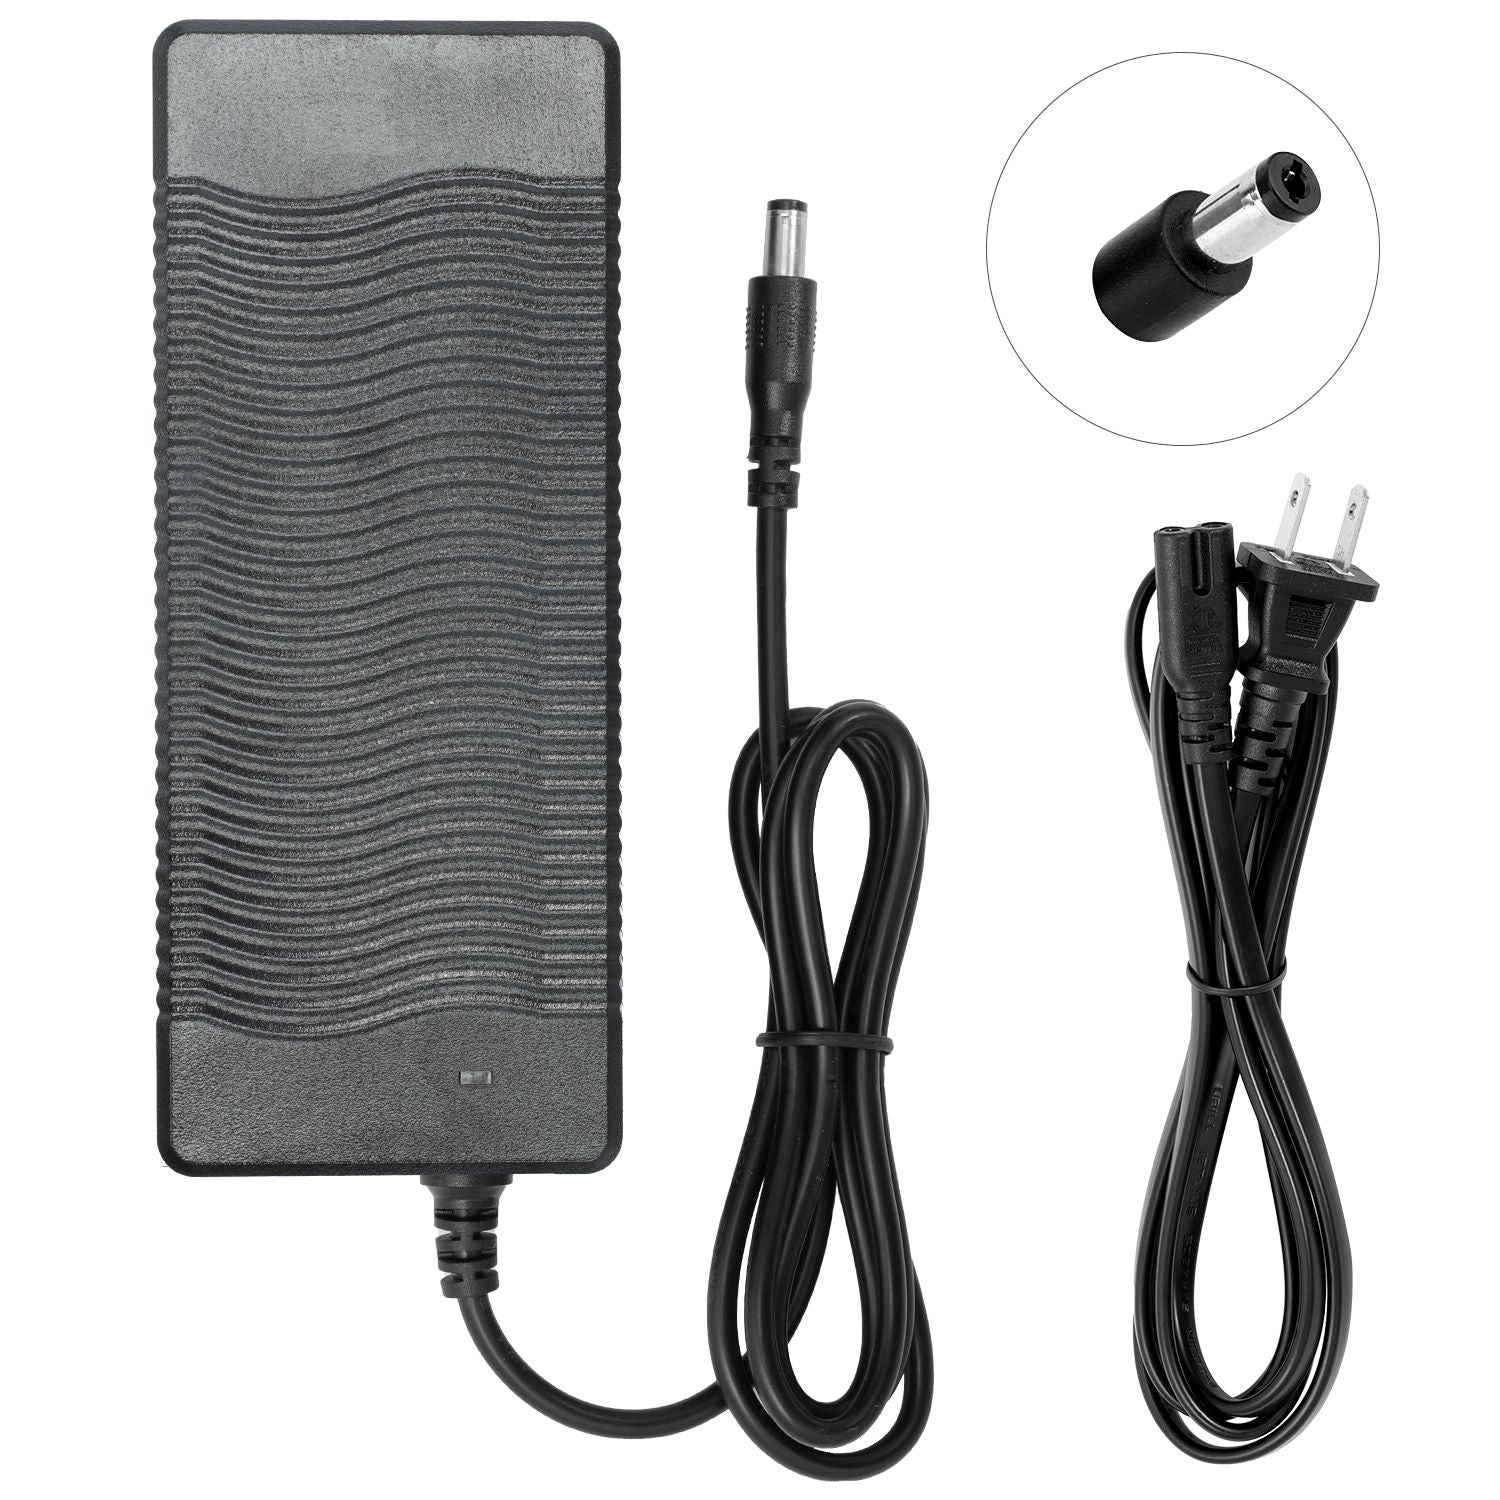 Charger for Juiced Electric Bike